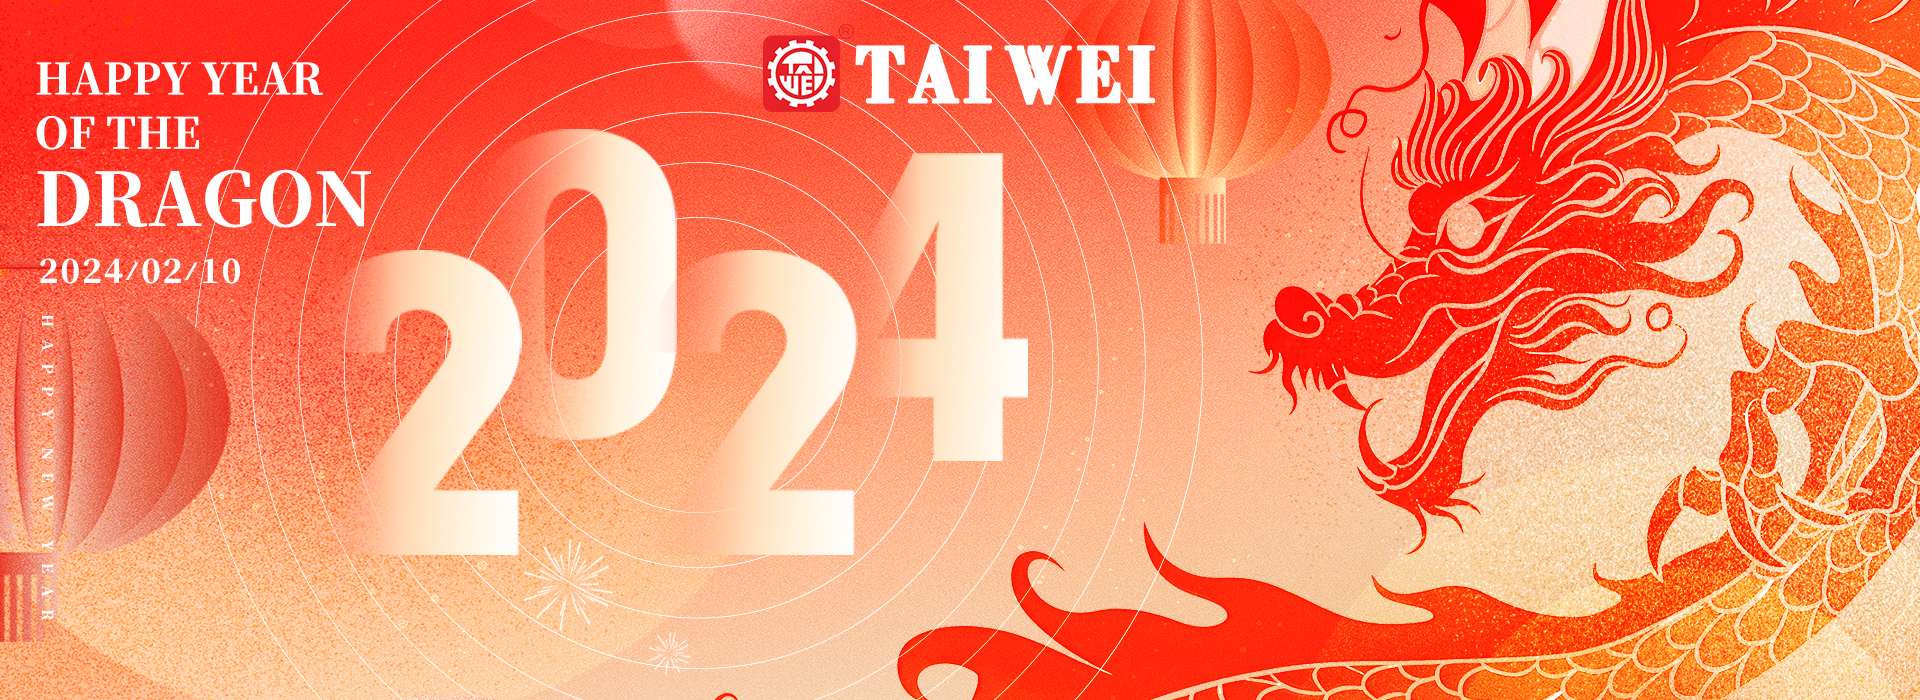 Taiwei Seiji wishes everyone good health, smooth work, good luck in everything and good luck in the year of the Dragon in the new year!